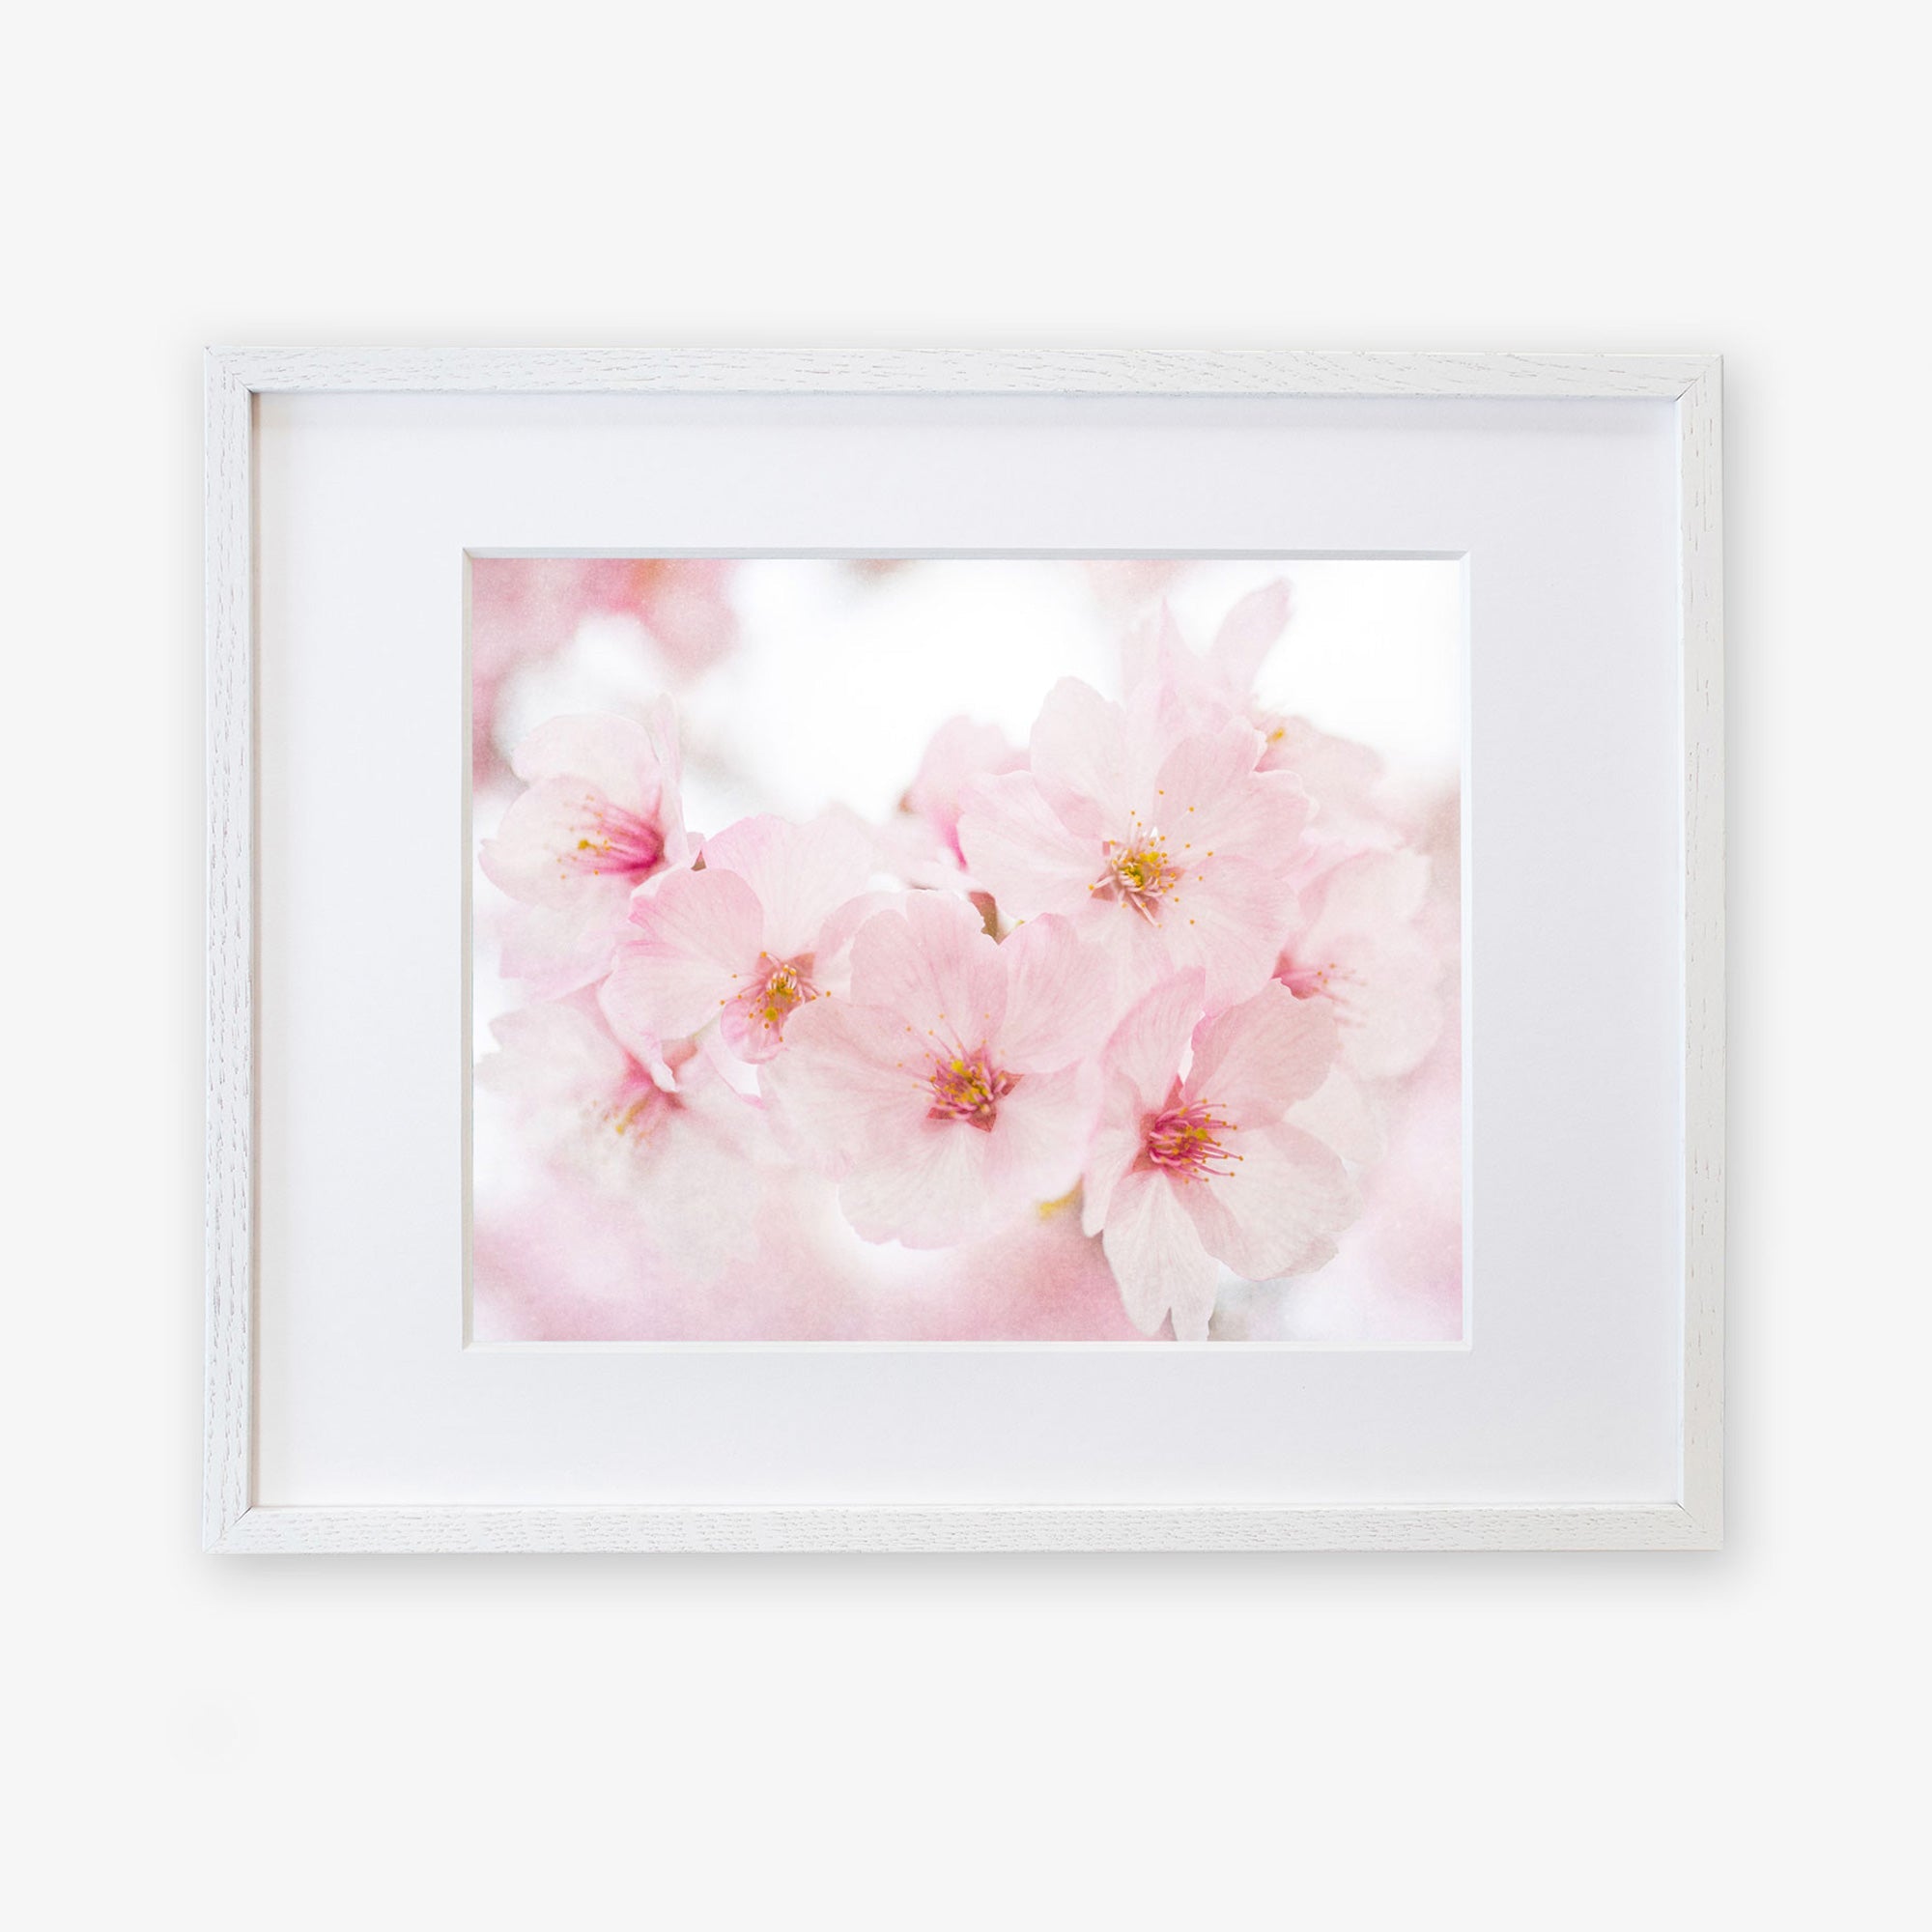 Offley Green's Pink Flower Print, 'Cherry Blossom', displayed in a simple white frame against a white wall, printed on archival photographic paper.